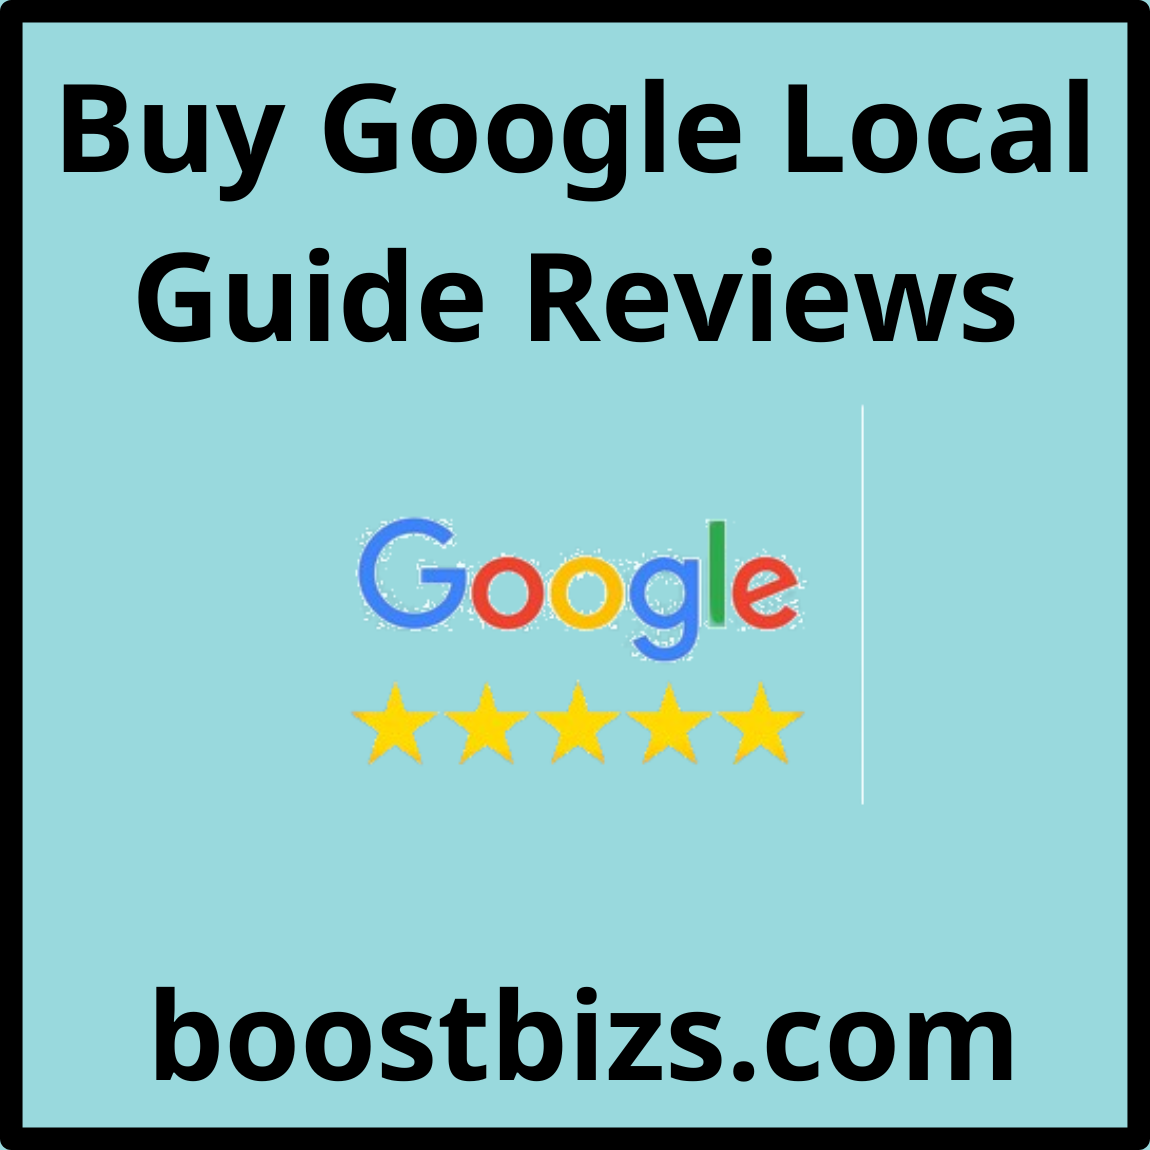 How To Use Google Local Guide Reviews - 100% Real And good reviews